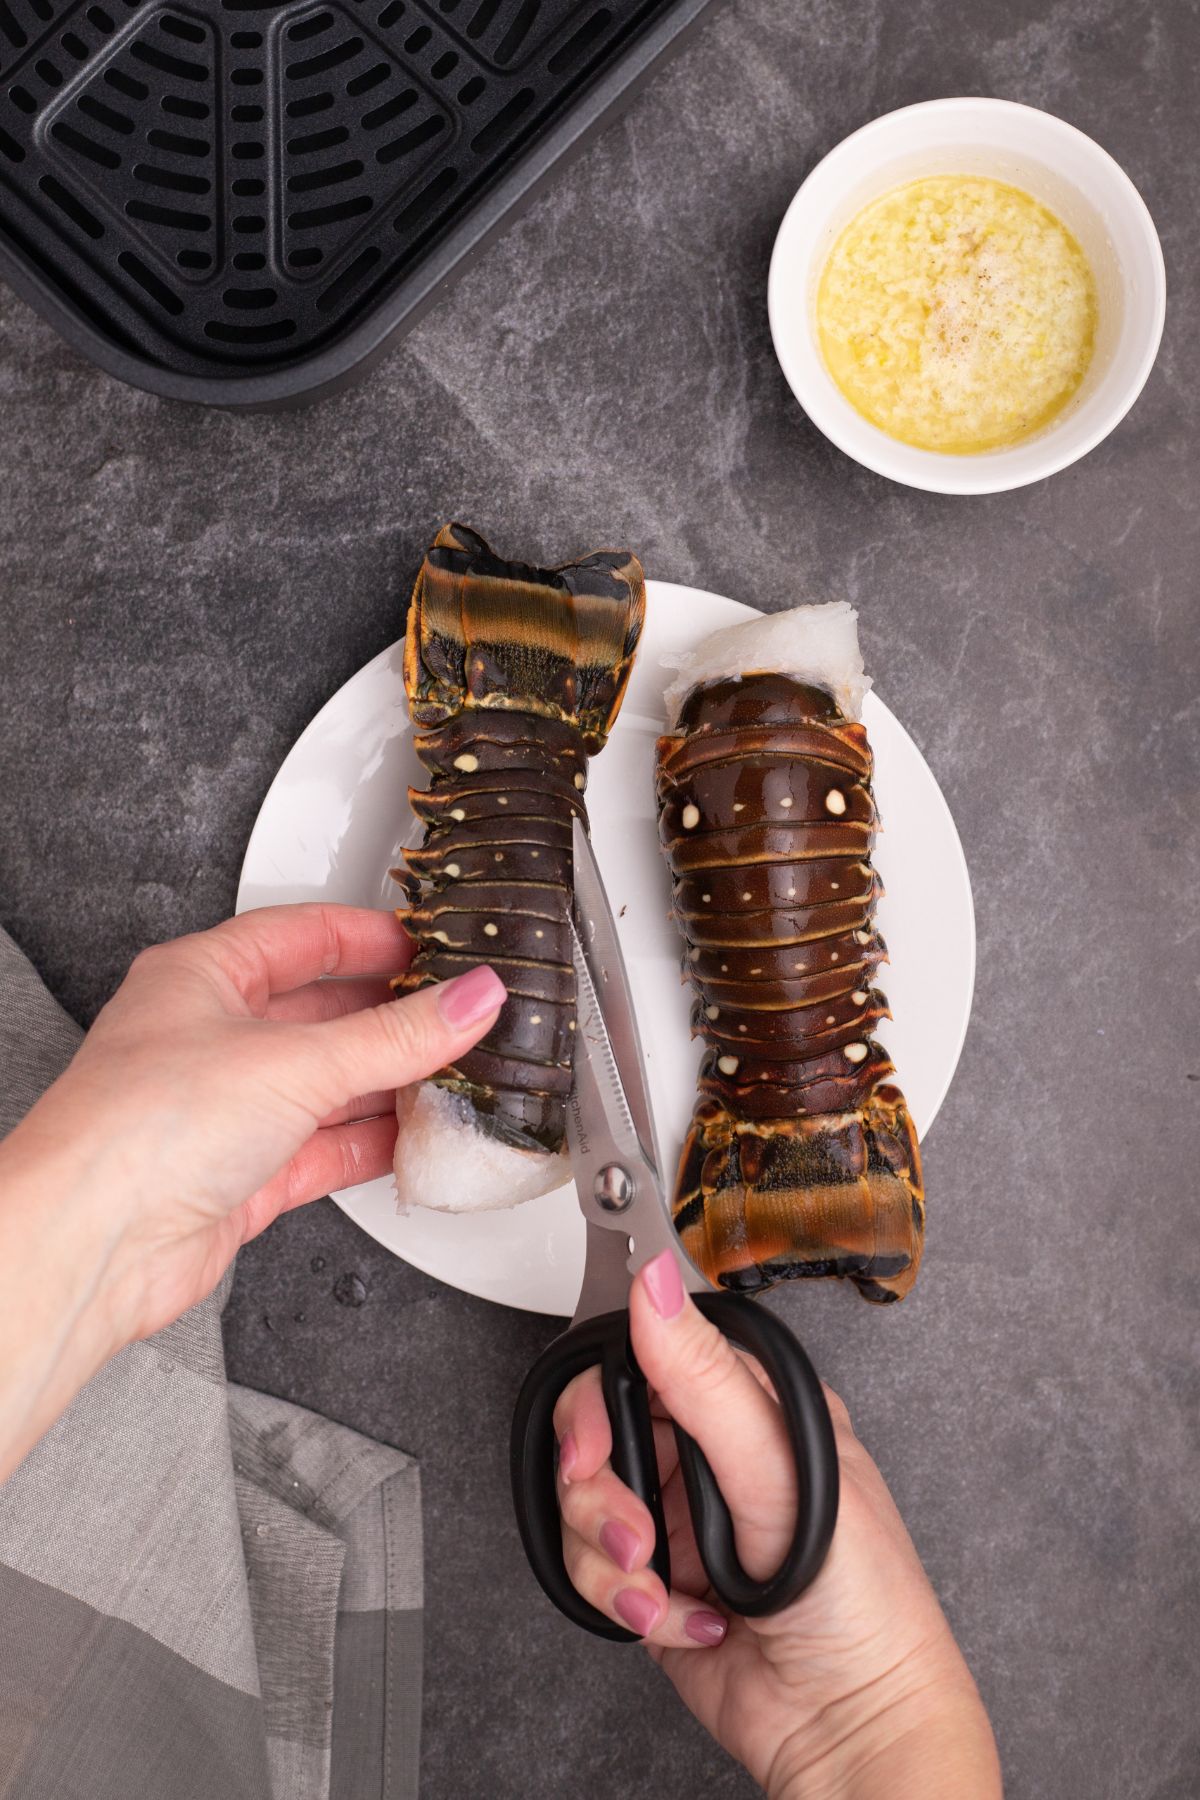 Lobster tails being cut open with kitchen shears on a white plate.